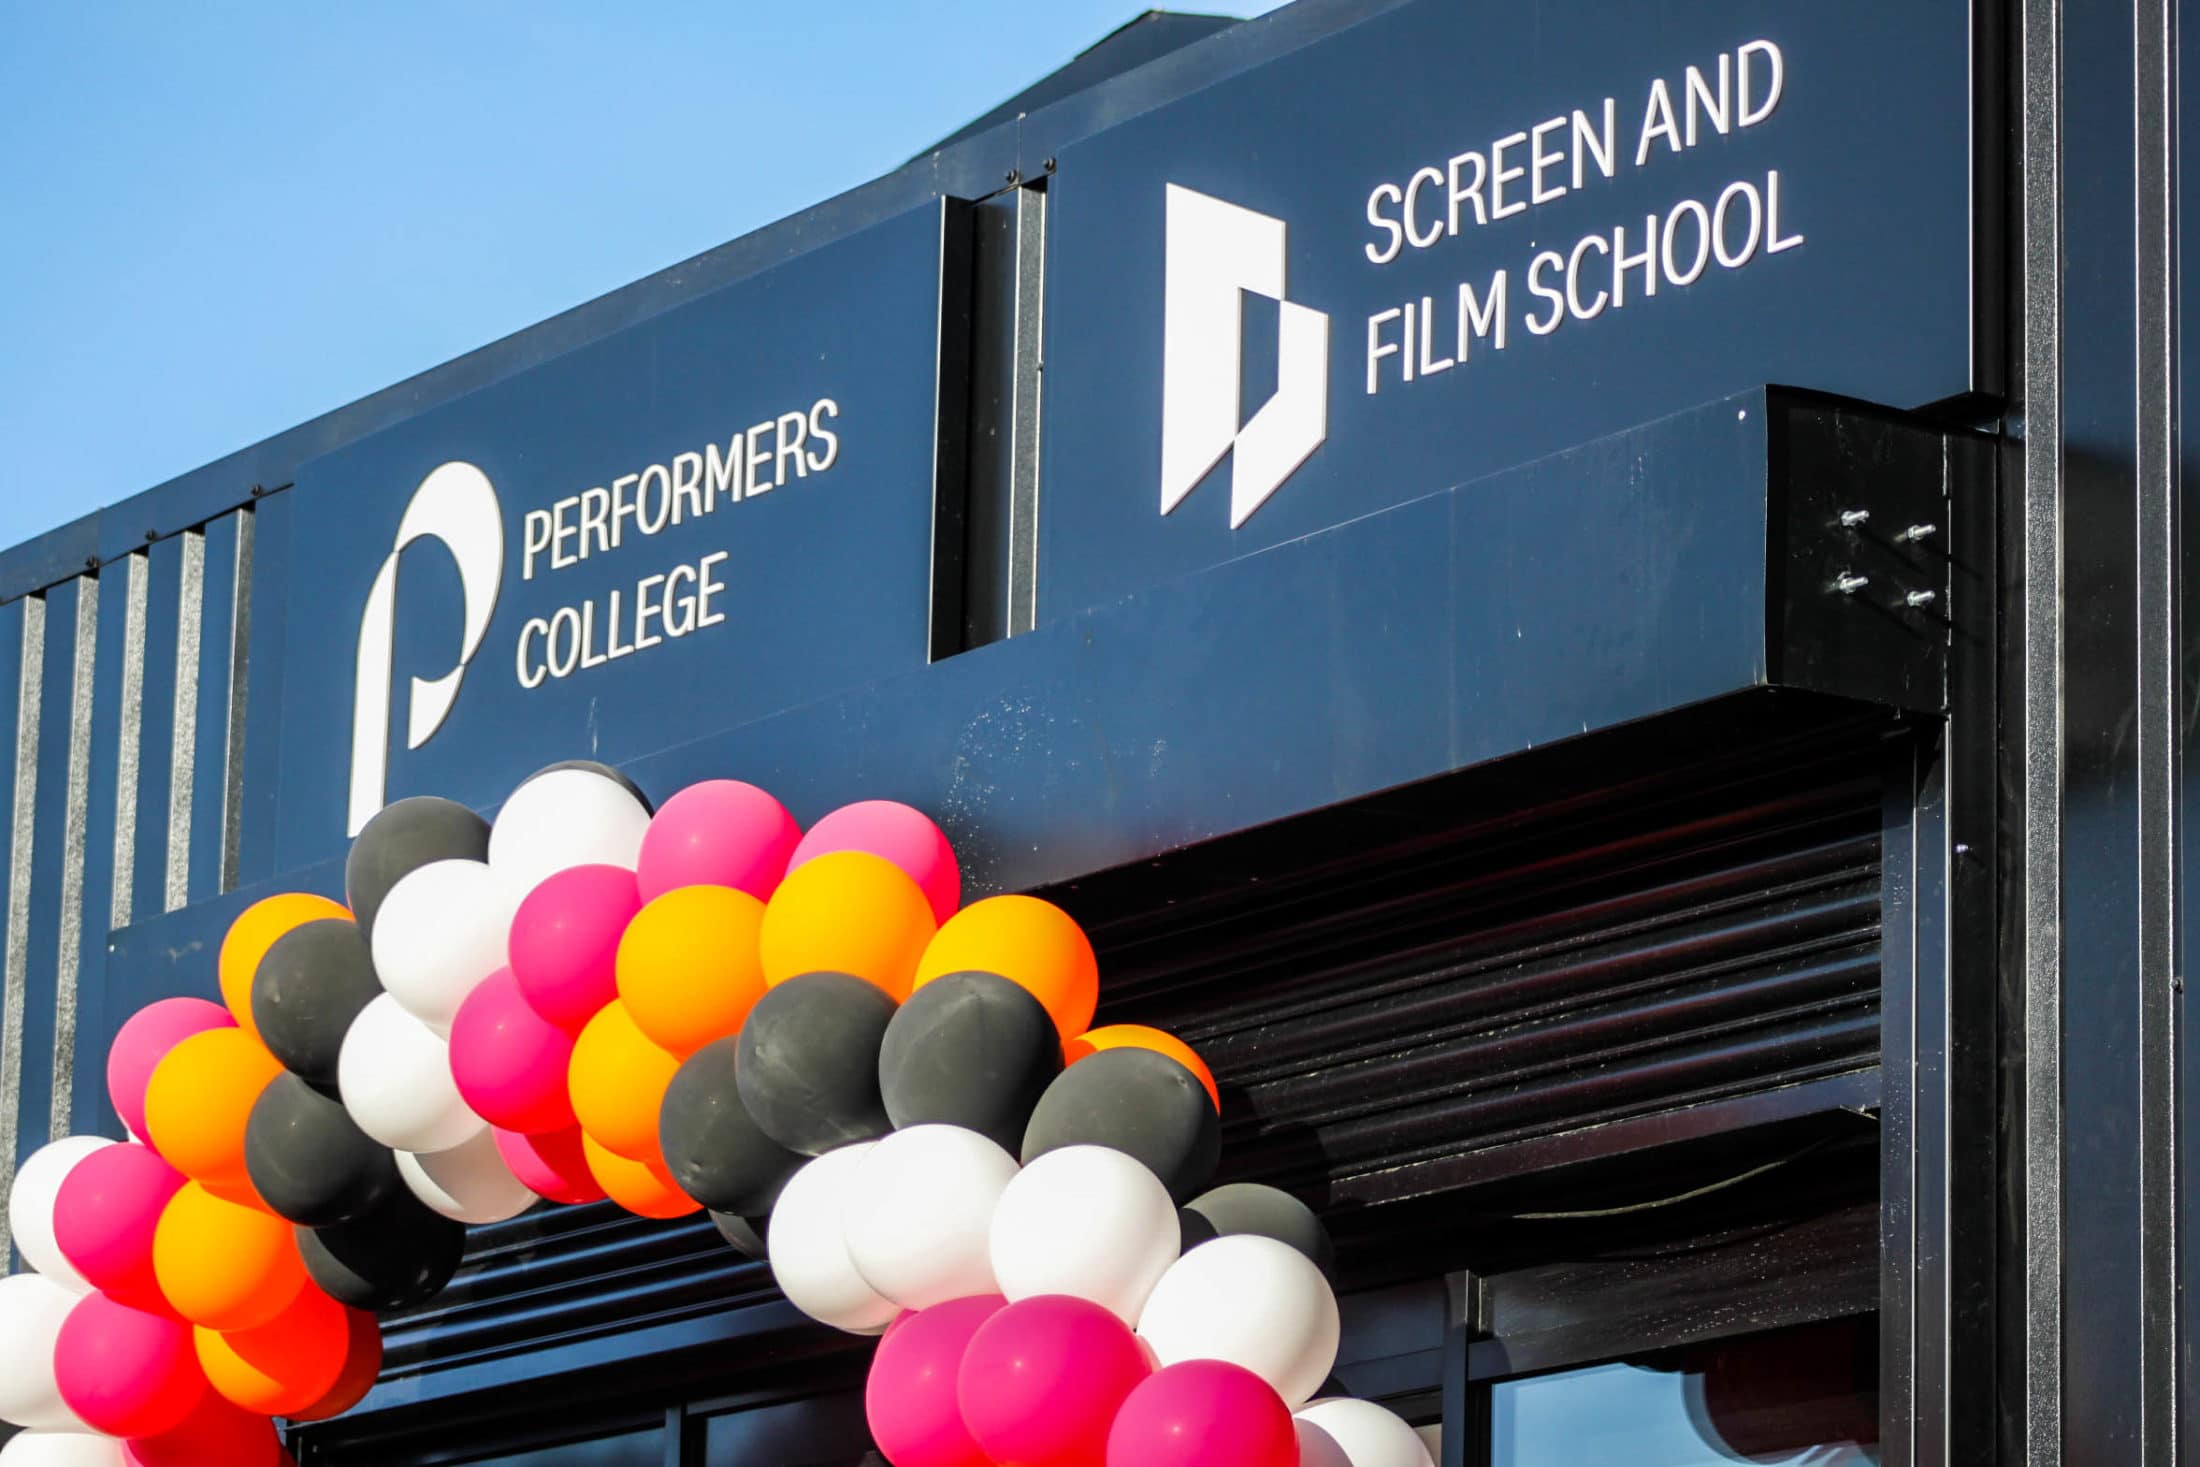 Performers College launches in Birmingham Performers College